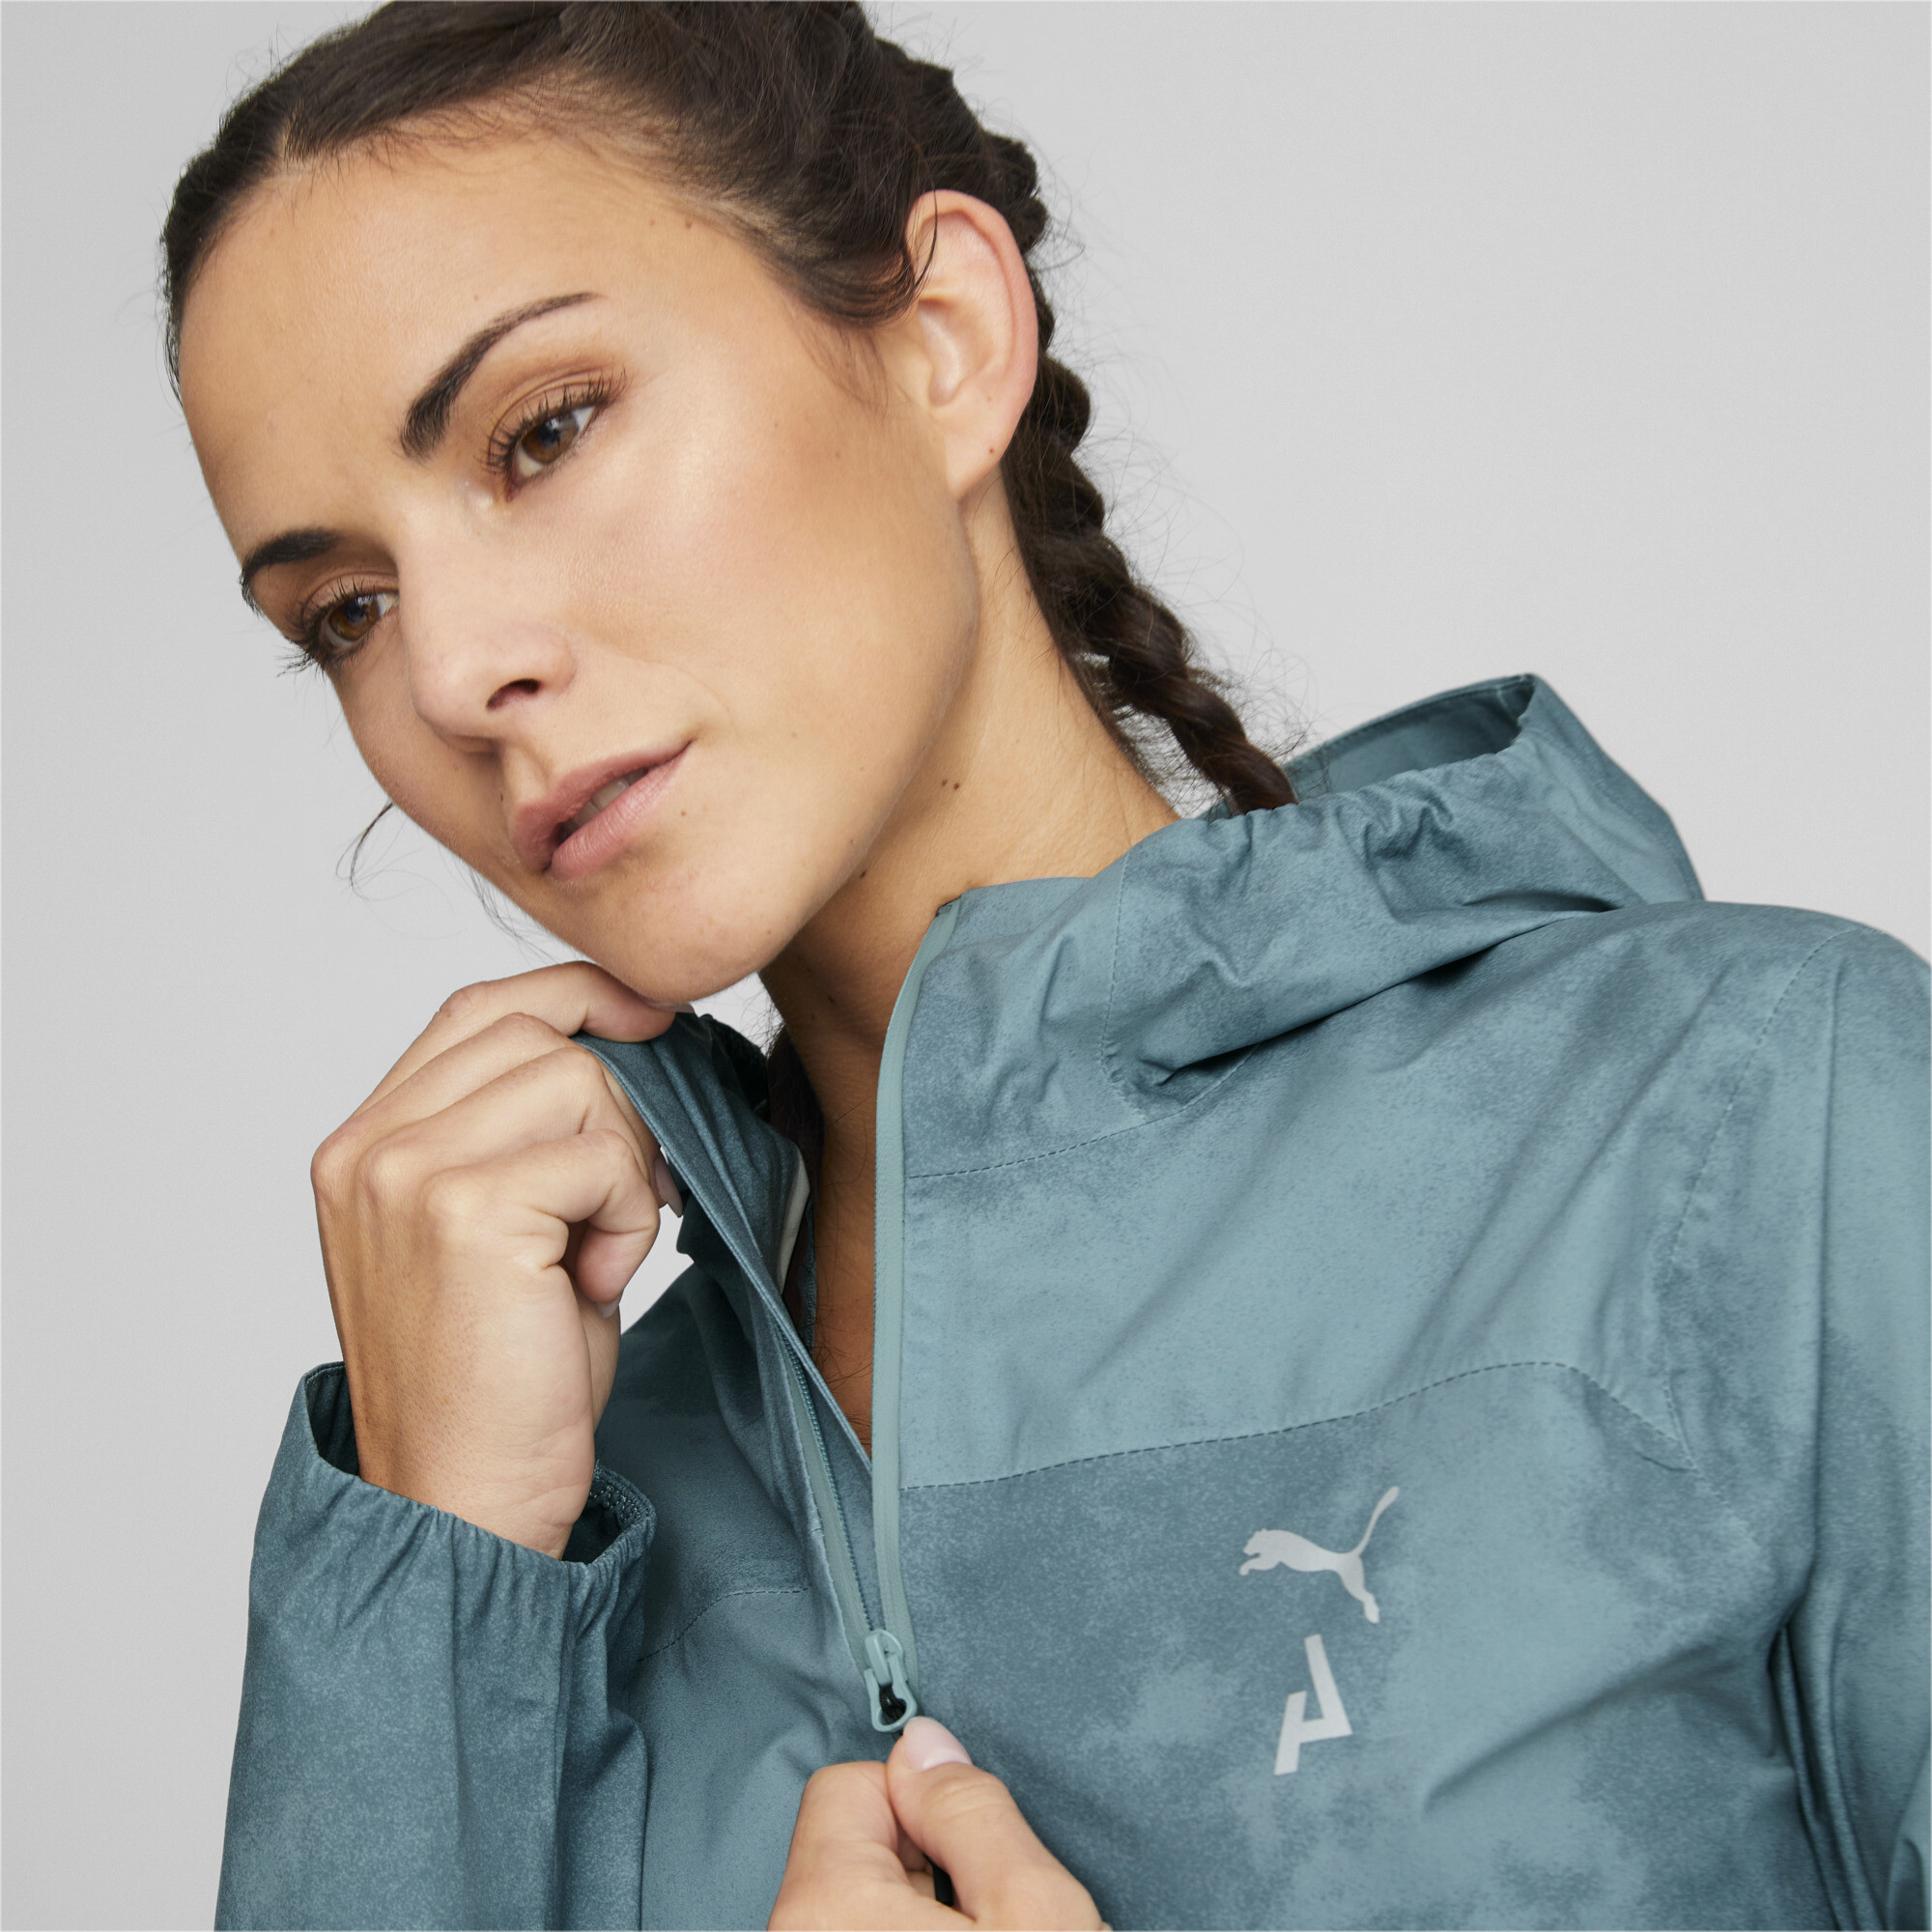 Women's Puma SEASONS Storm CELL Sympa TexÂ® Packable Trail Running Jacket, Gray, Size S, Clothing